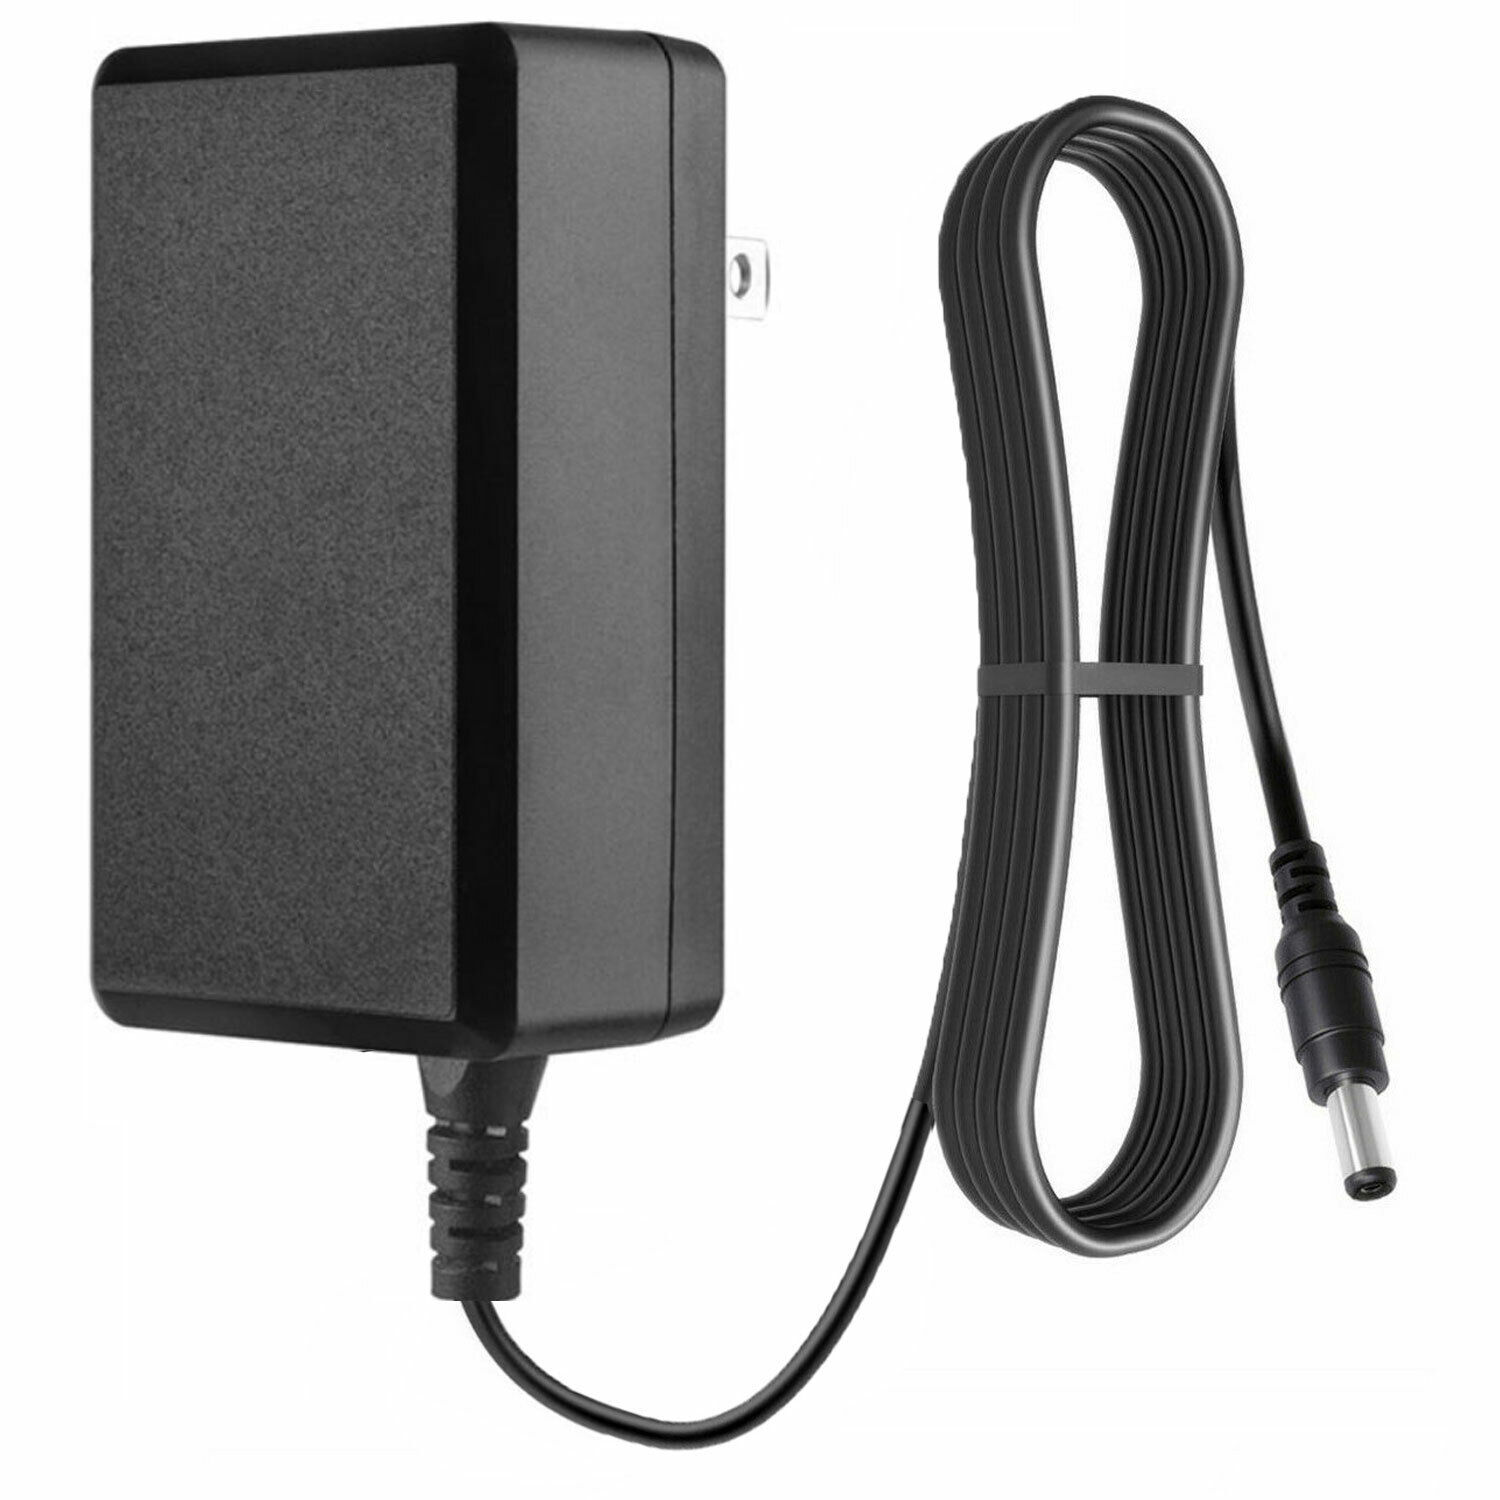 Replacement for XING YUAN 12V 1.0A AC Adapter model no XY-1201000-B WHITE UK Manufacturer Warranty 1 year Output Voltag